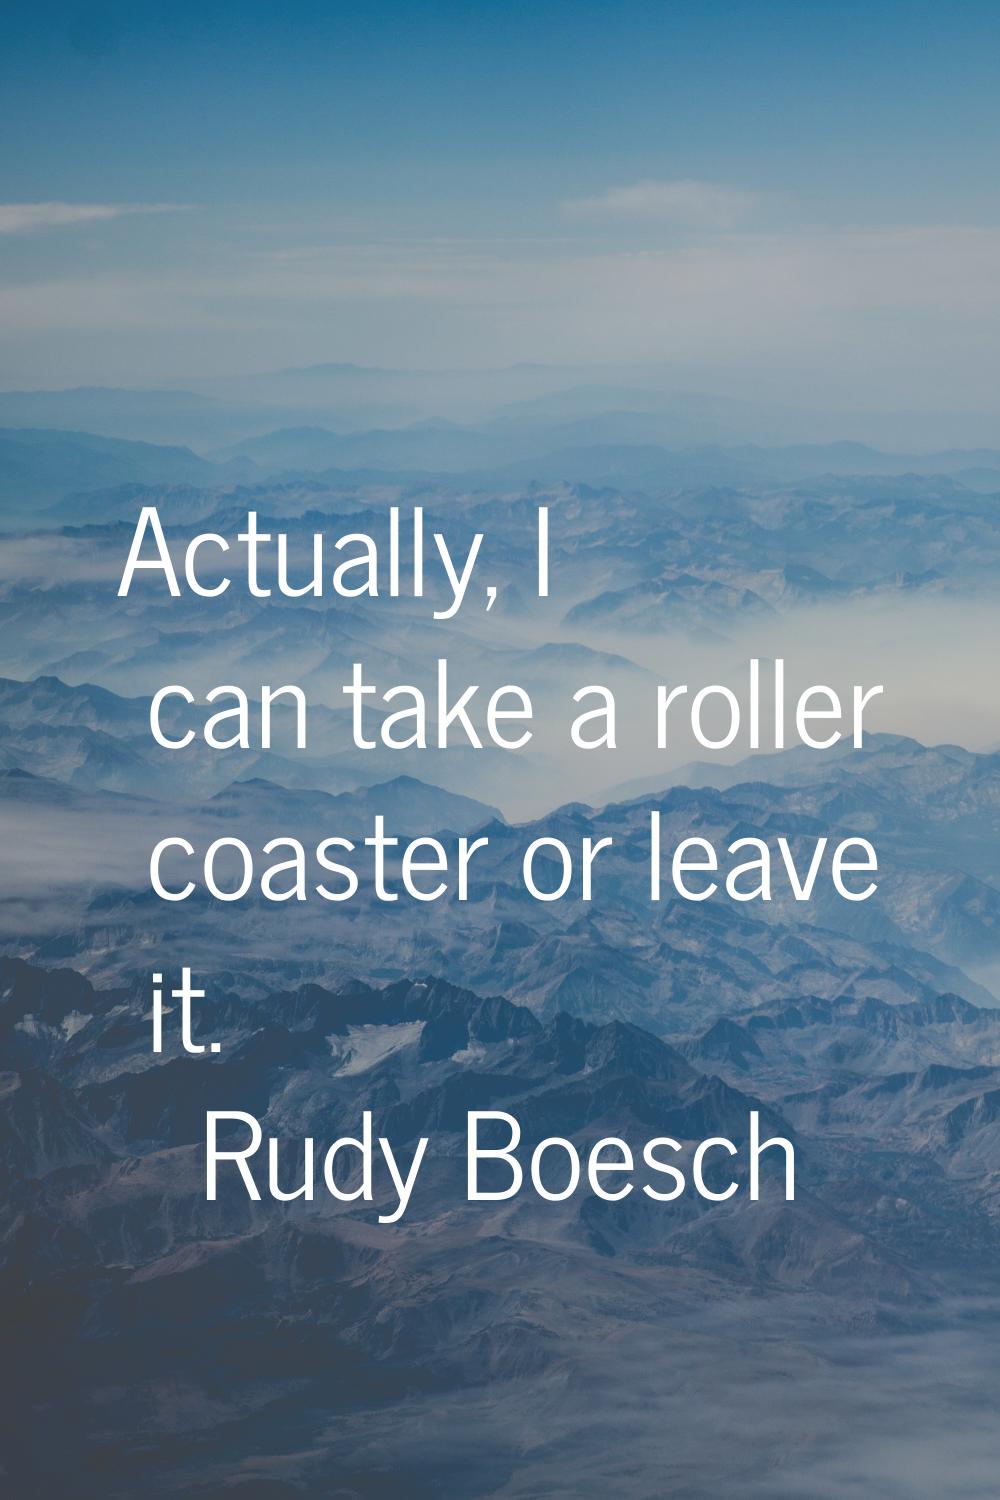 Actually, I can take a roller coaster or leave it.